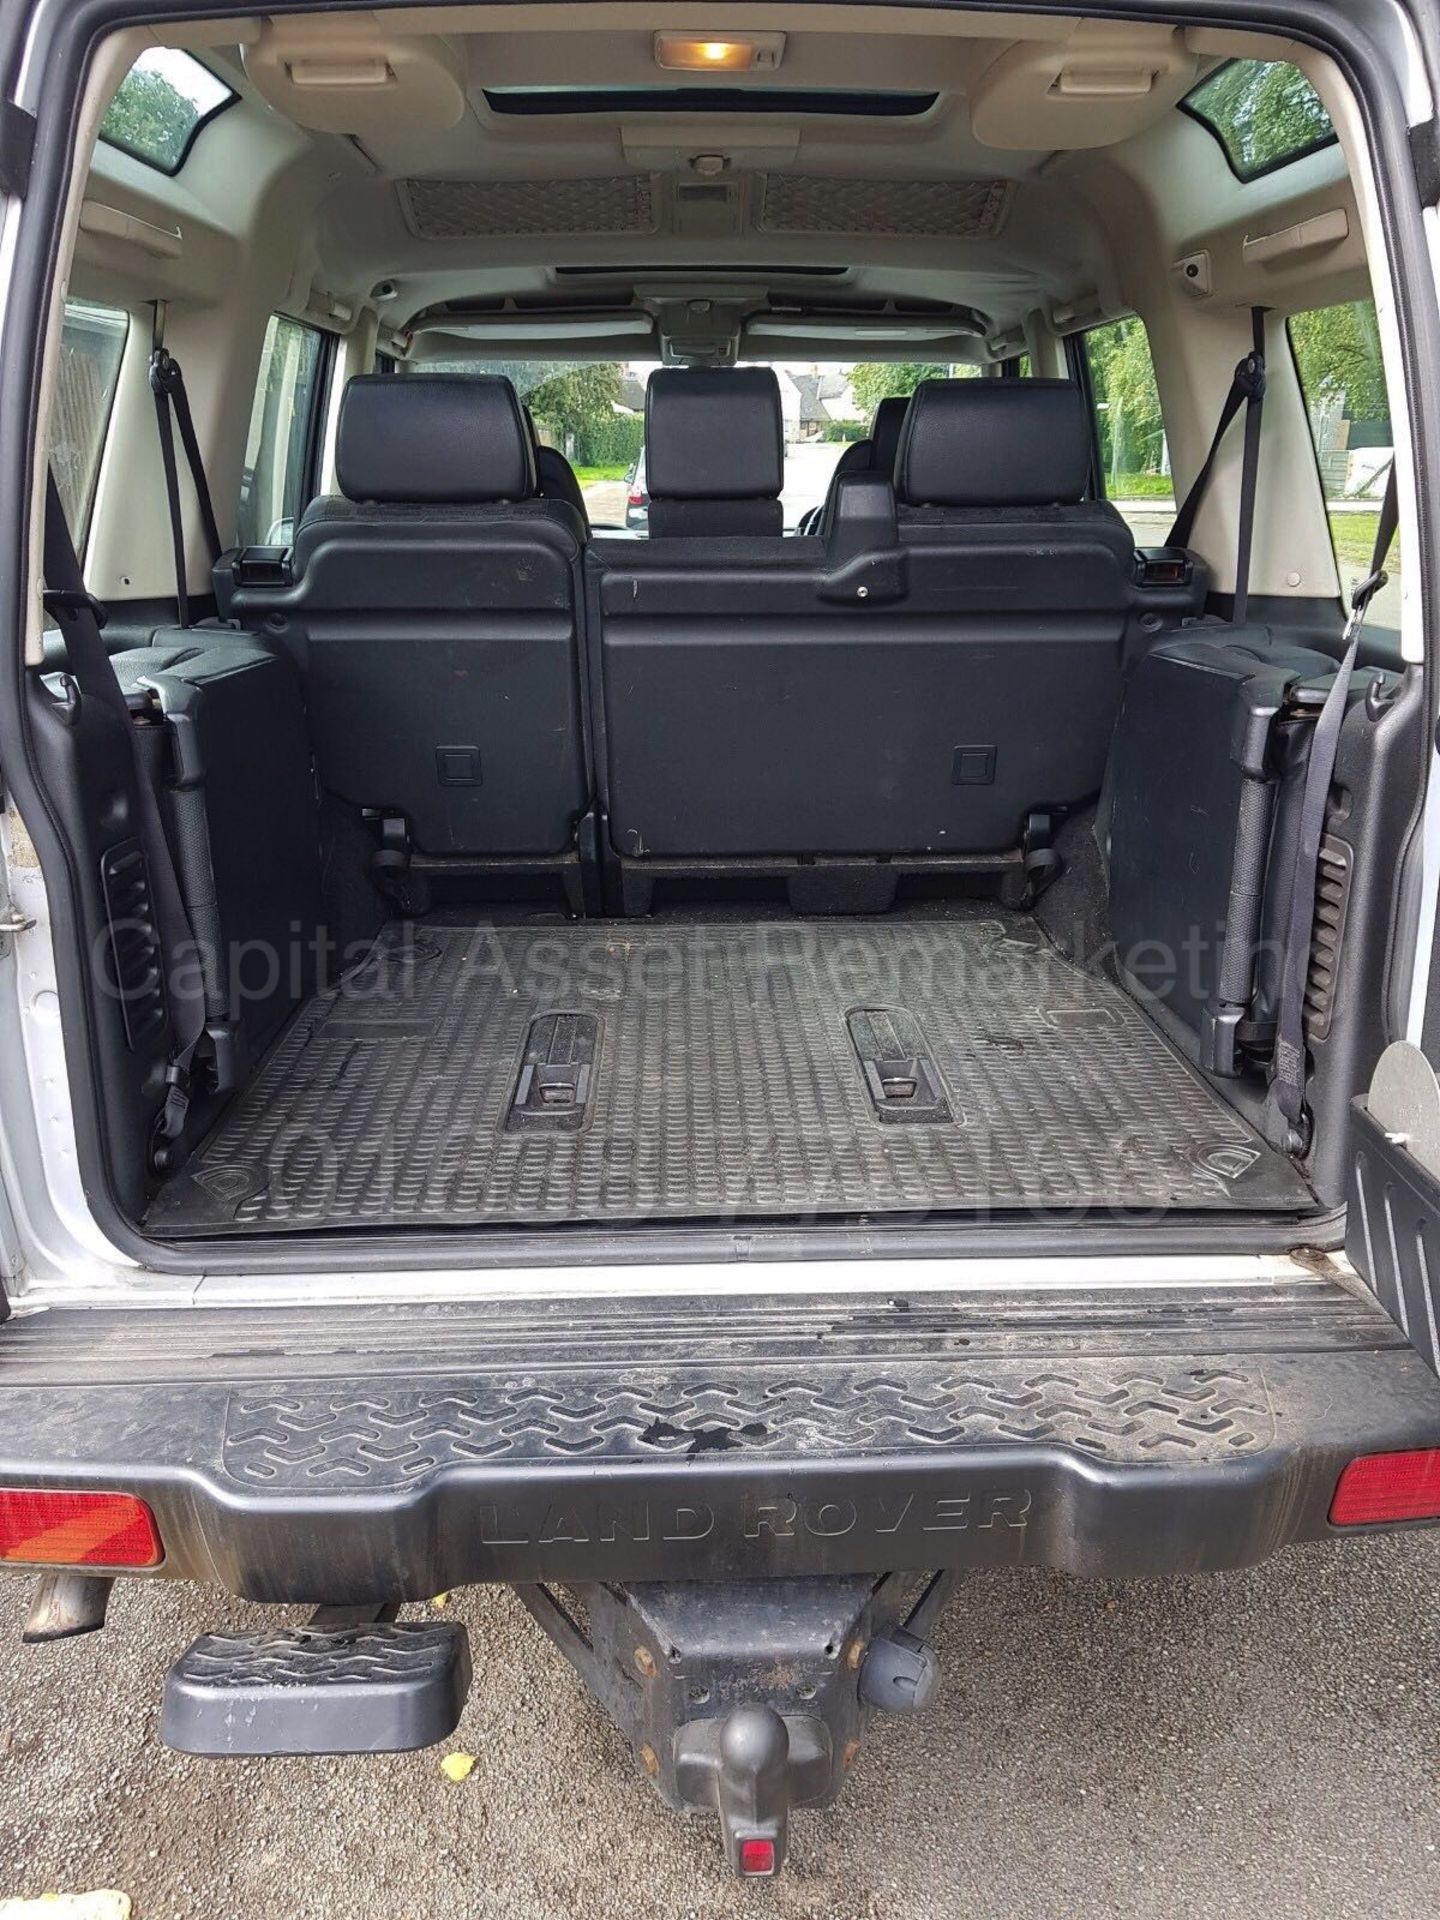 (On Sale) LAND ROVER DISCOVERY 'GS EDITION' (2004 MODEL) 'TD5 - AUTO - 7 SEATER' (NO VAT - SAVE 20%) - Image 12 of 16